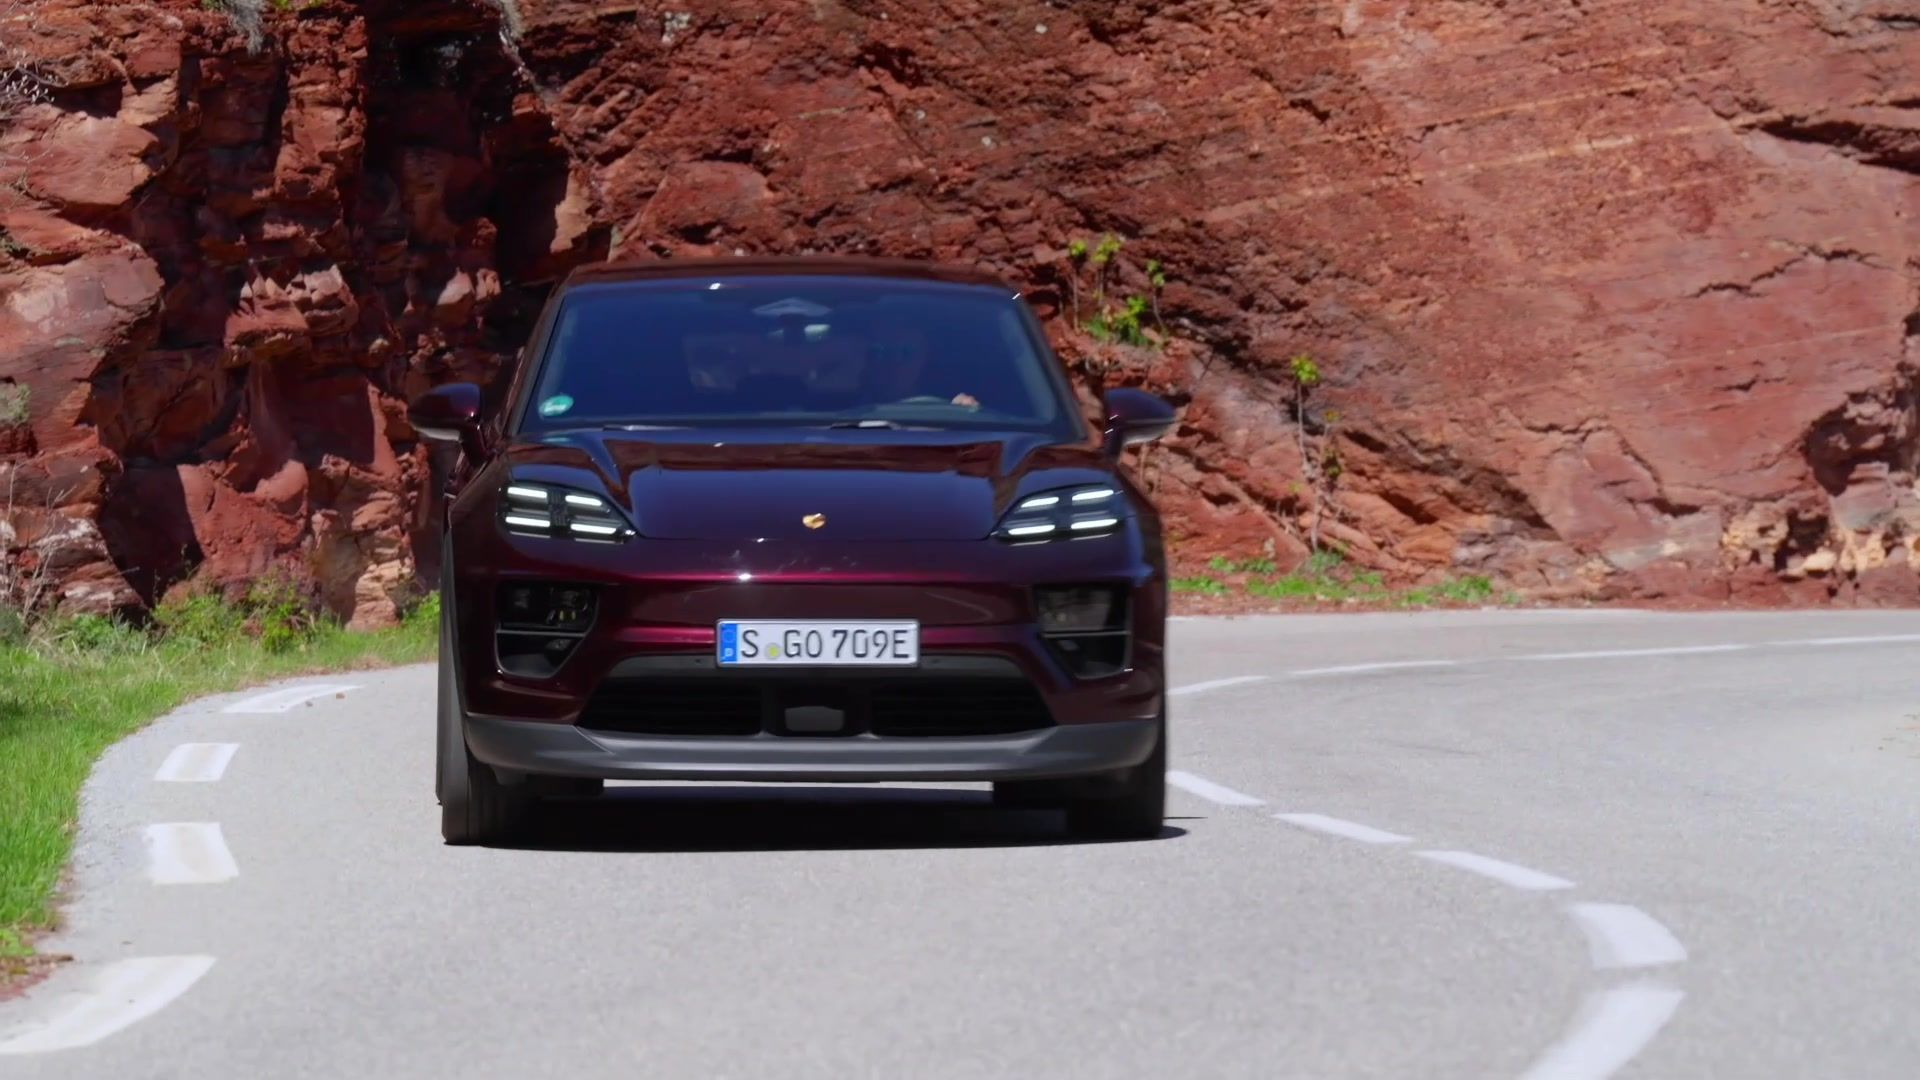 Macan sets new standards - first all-electric SUV from Porsche